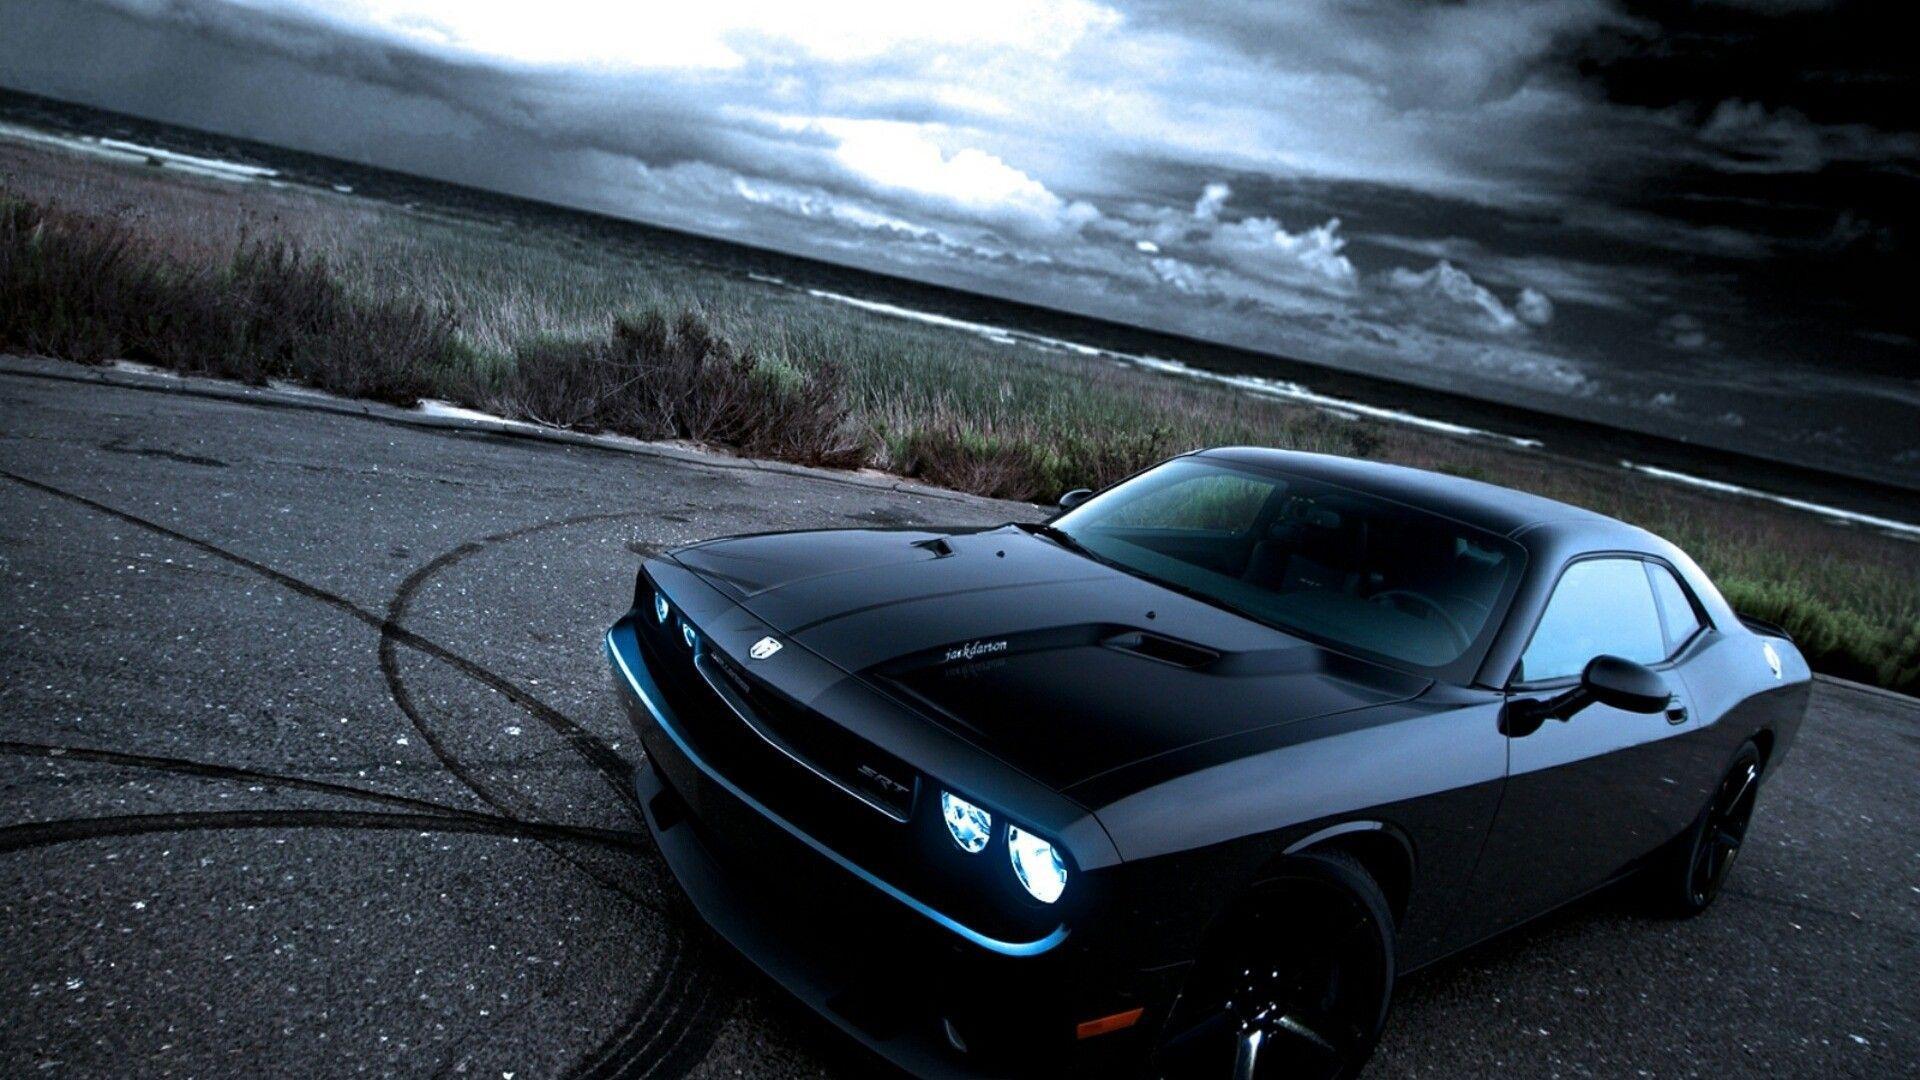 Muscle Car Wallpapers - Wallpaper Cave Muscle Car Wallpaper 1920x1080